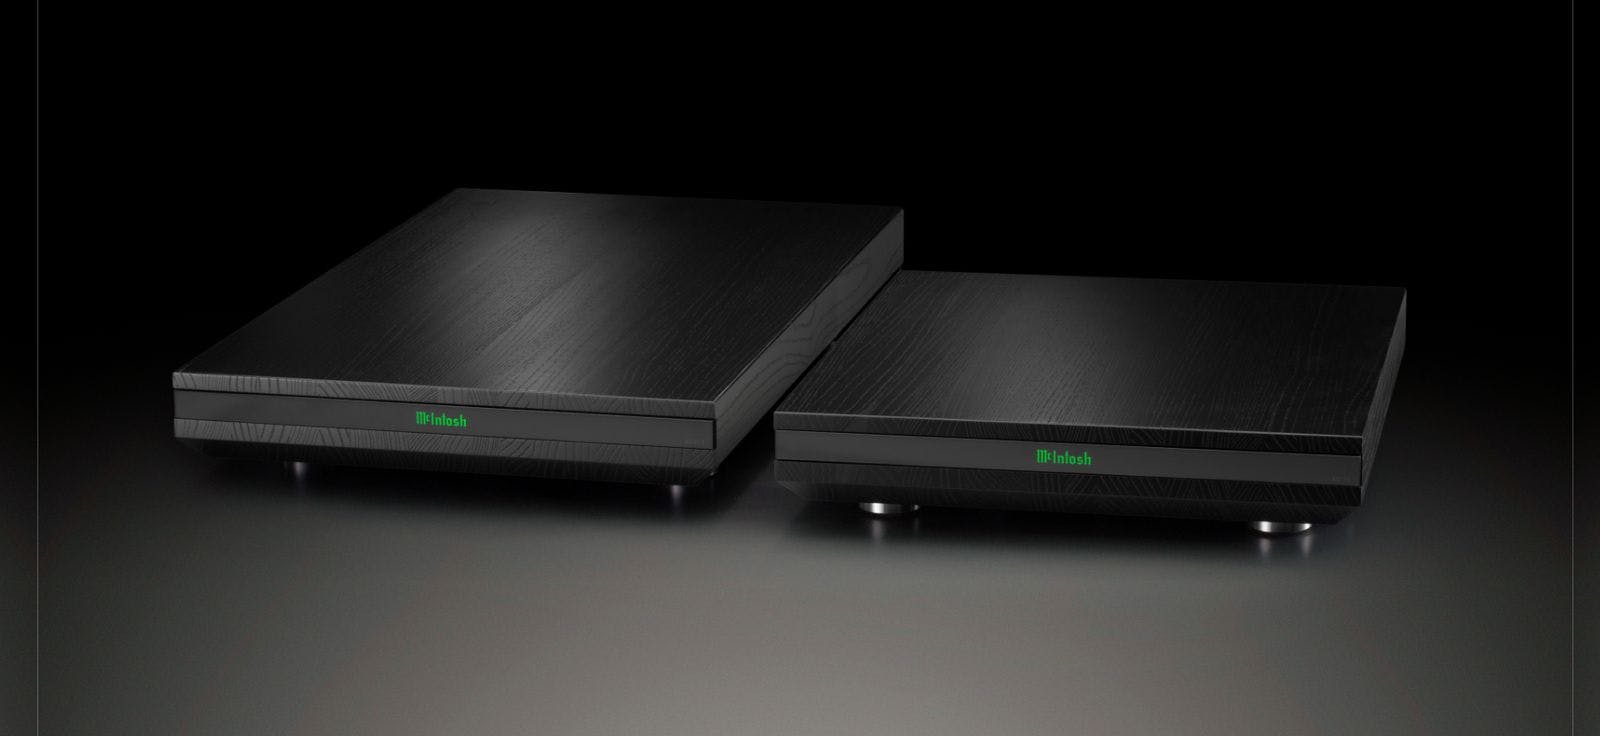 Stands that deliver: McIntosh launches dedicated stands for its highest-performance amplifiers